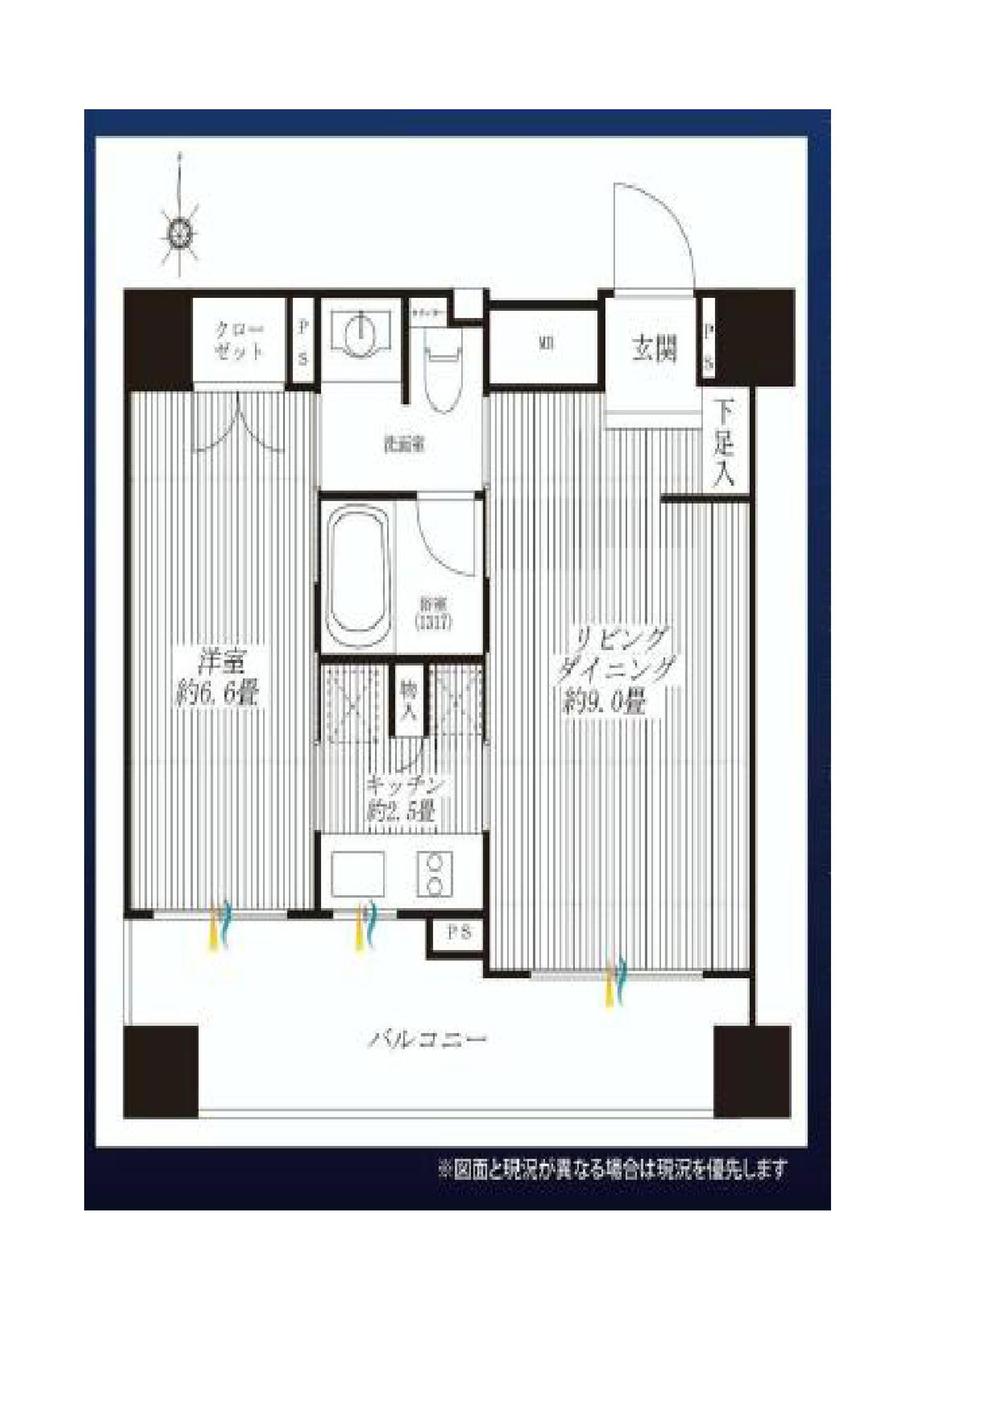 Floor plan. 1LDK, Price 32,800,000 yen, Occupied area 40.05 sq m , Facing the balcony area 7.53 sq m wide wide balcony Bright kitchen with a feeling of opening with a window